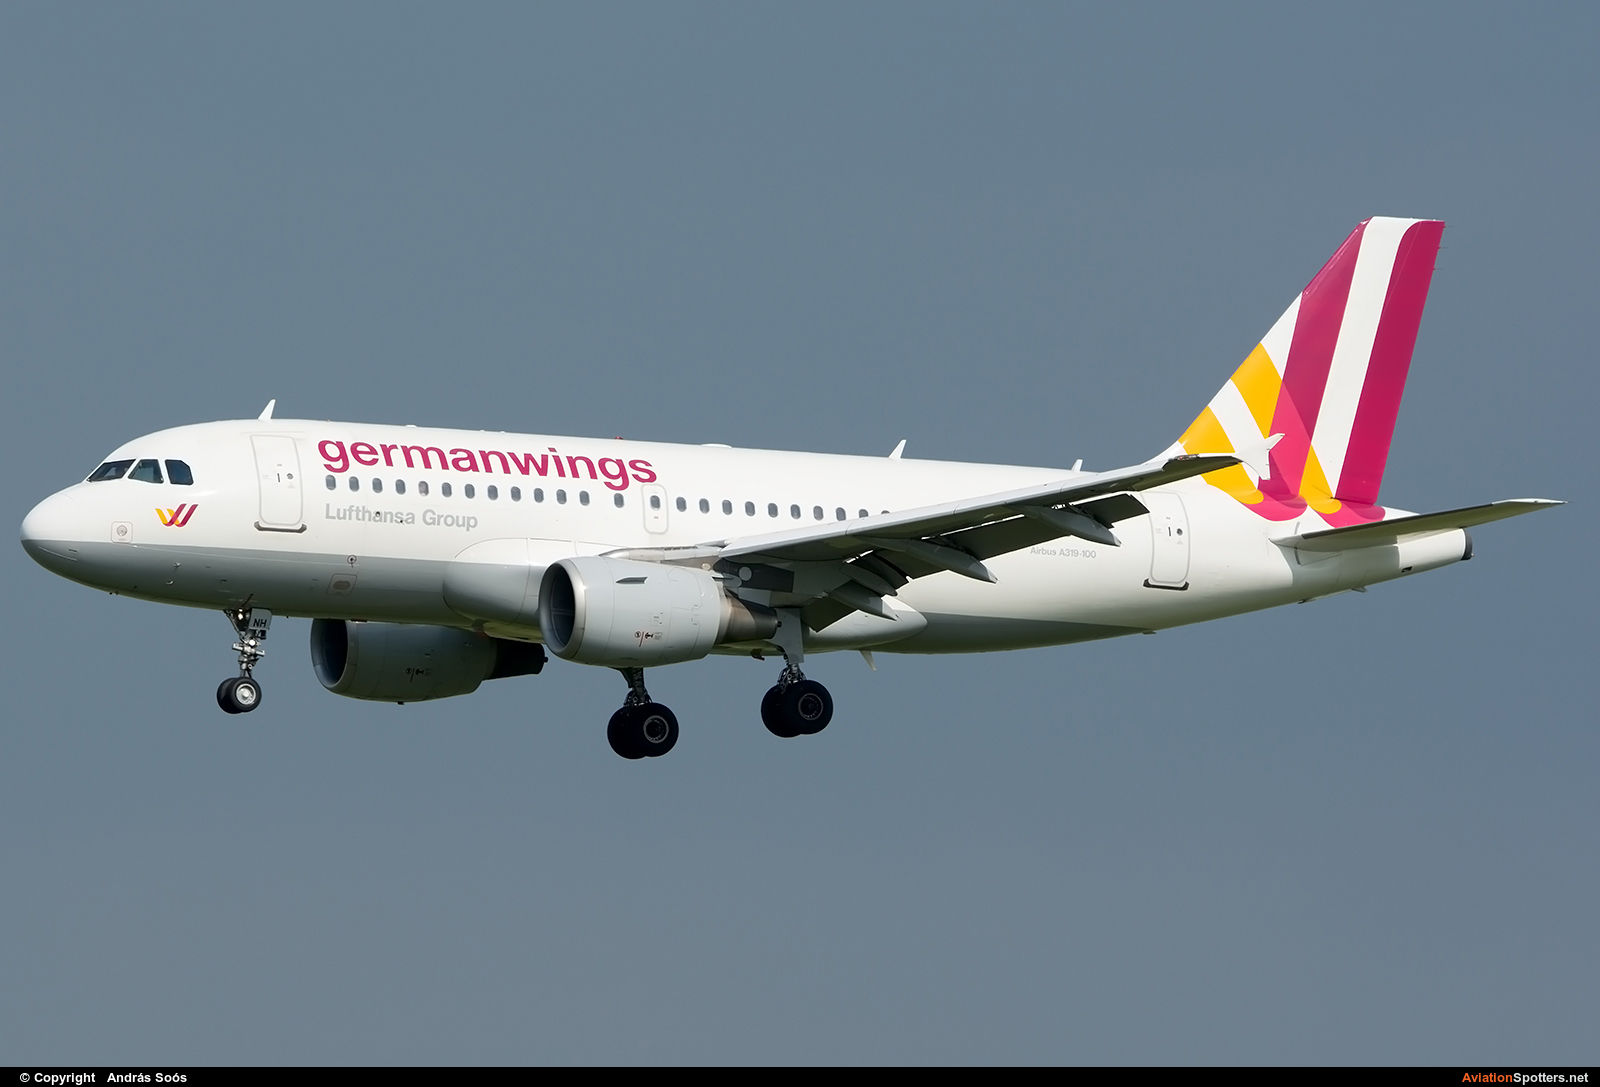 Germanwings  -  A319  (D-AKNH) By András Soós (sas1965)